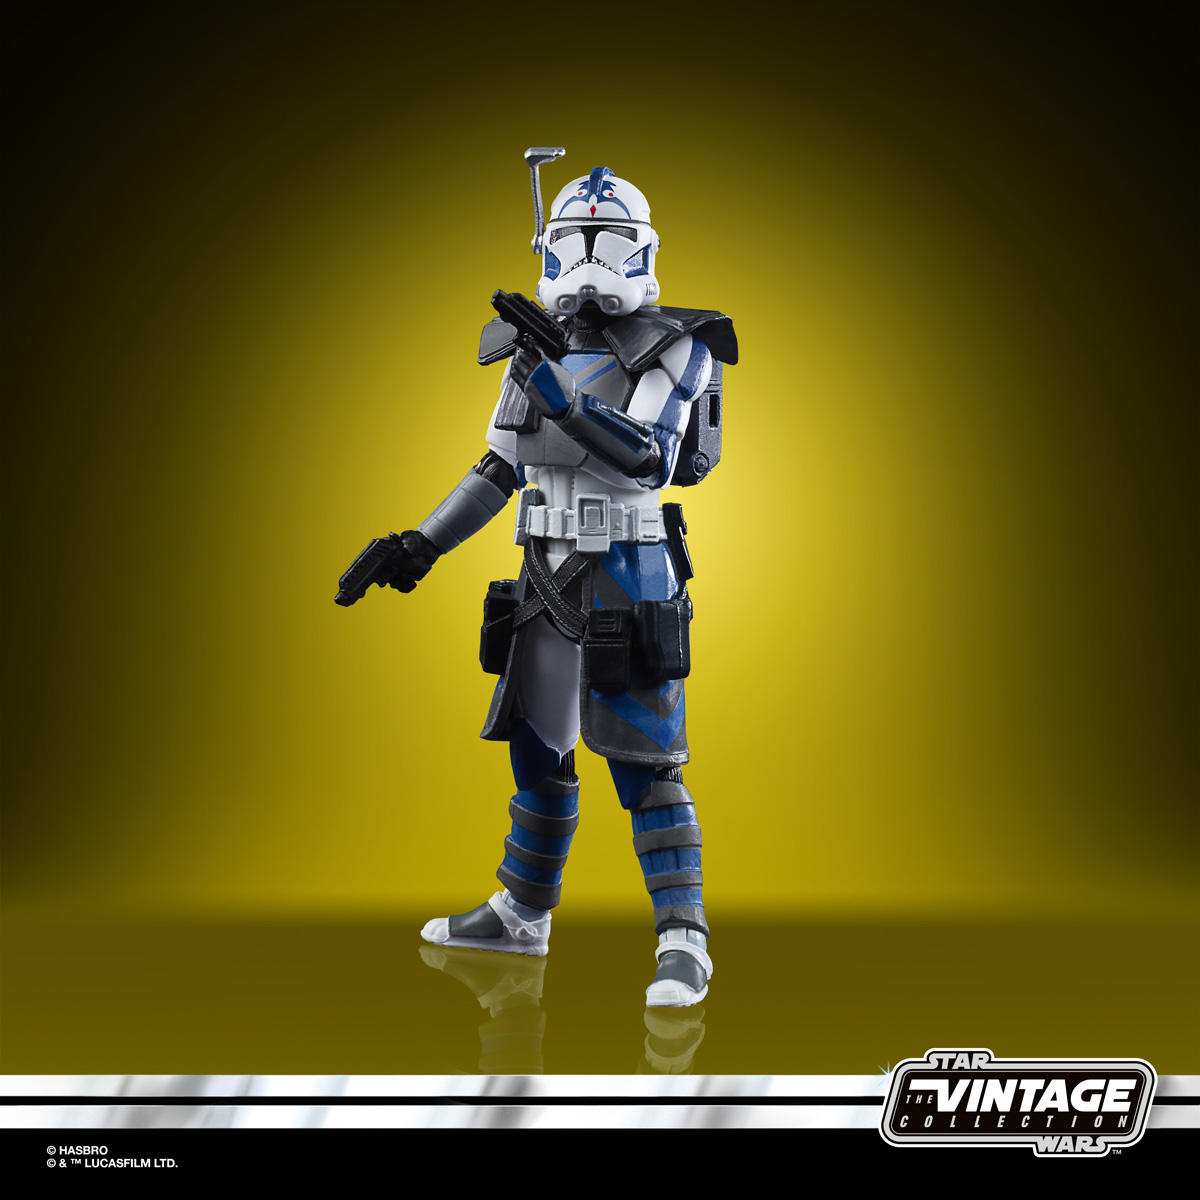 Star Wars The Vintage Collection Star Wars The Clone Wars 501st Legion Arc Troopers Figure 3 Pack Oop 3